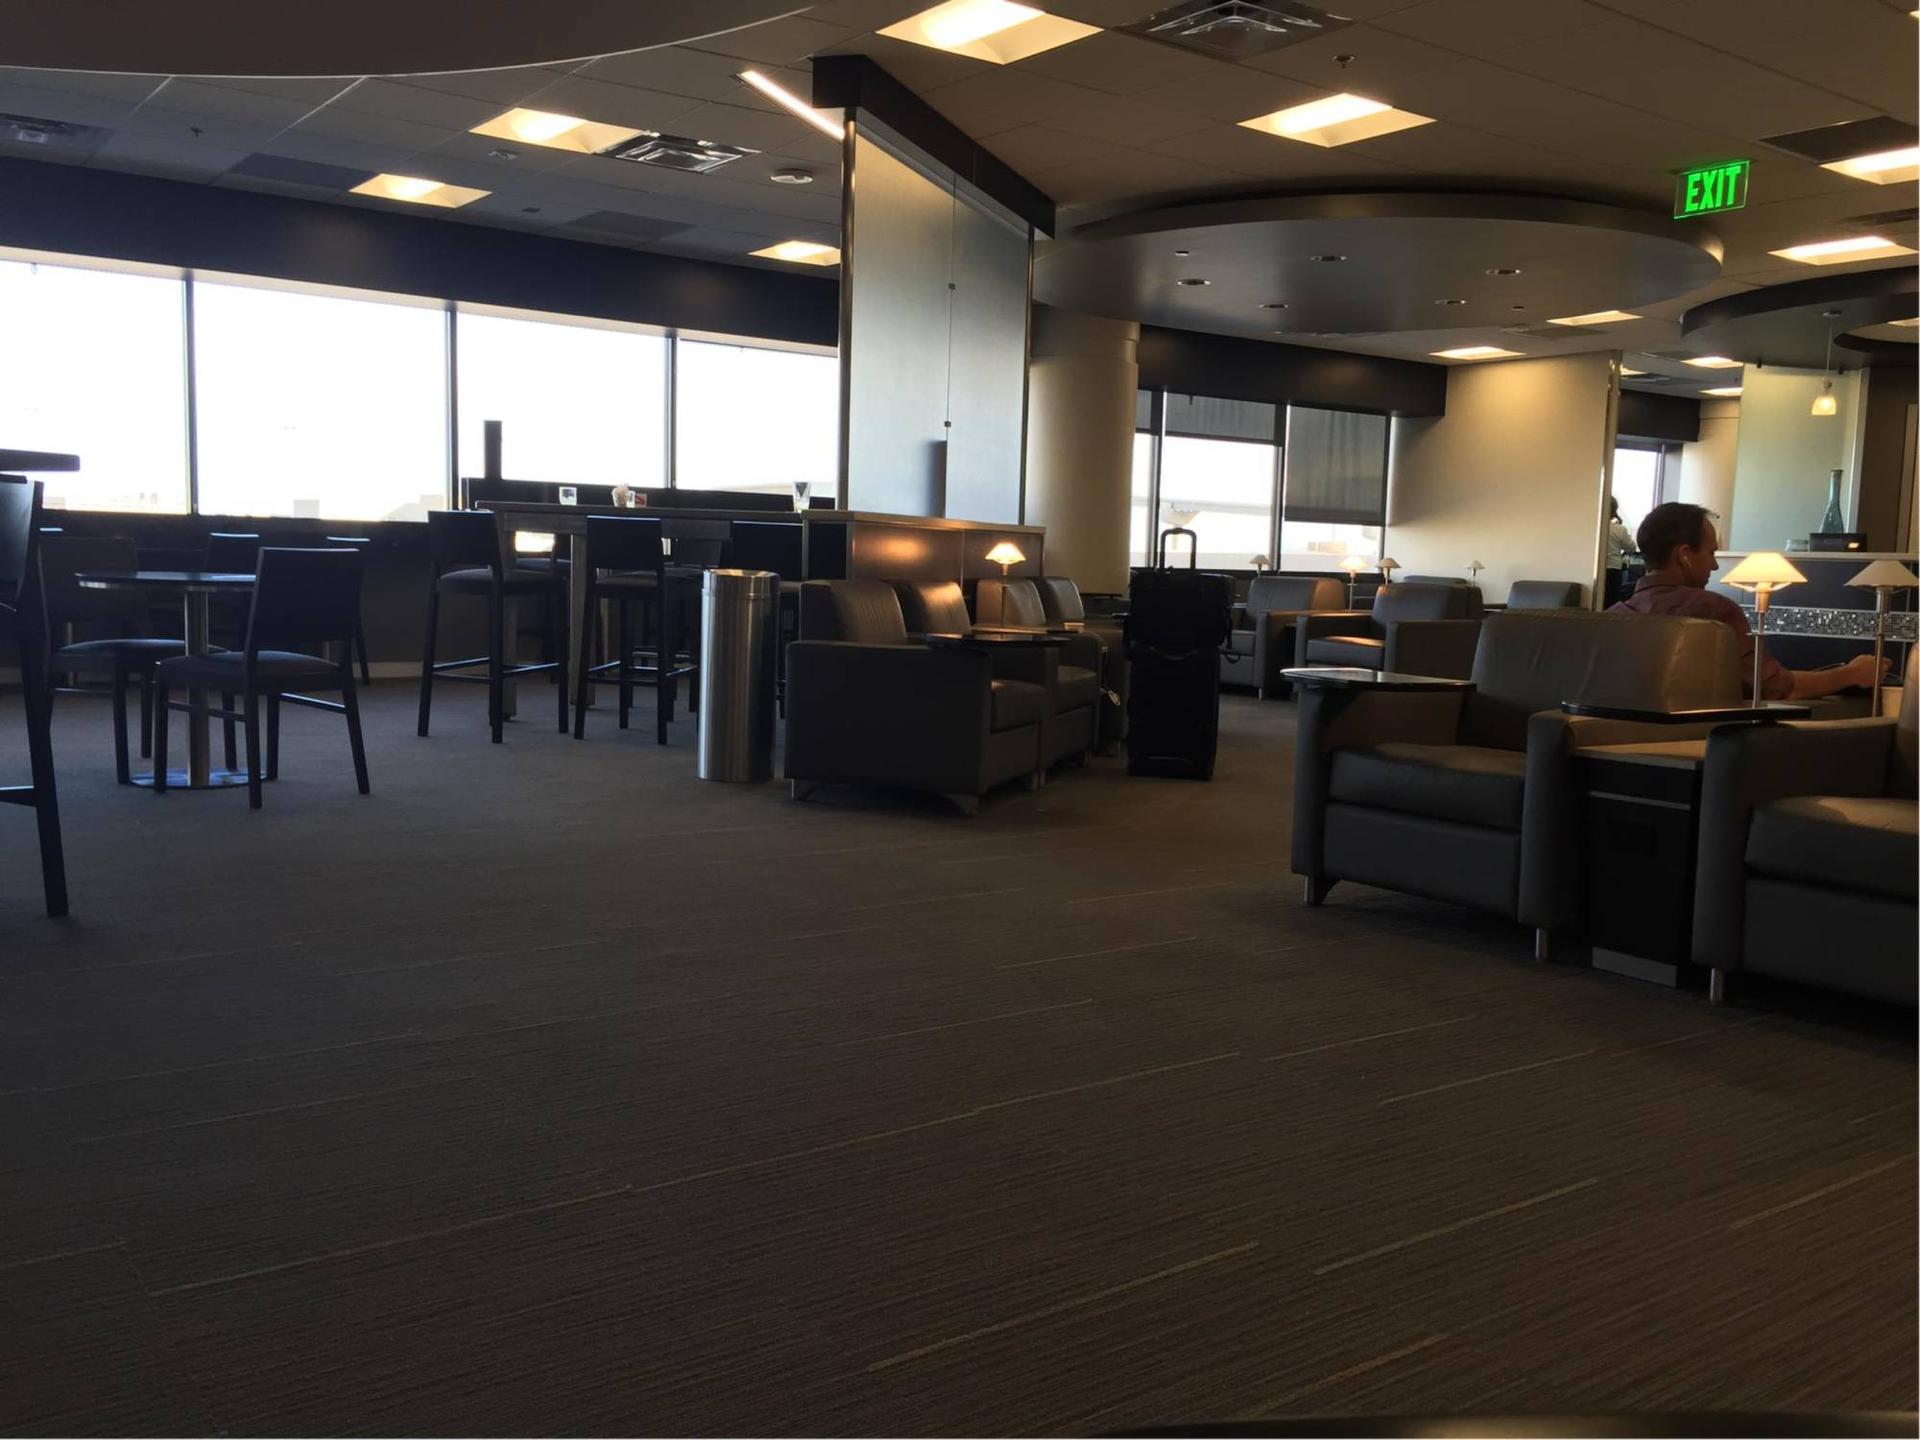 American Airlines Admirals Club image 10 of 12